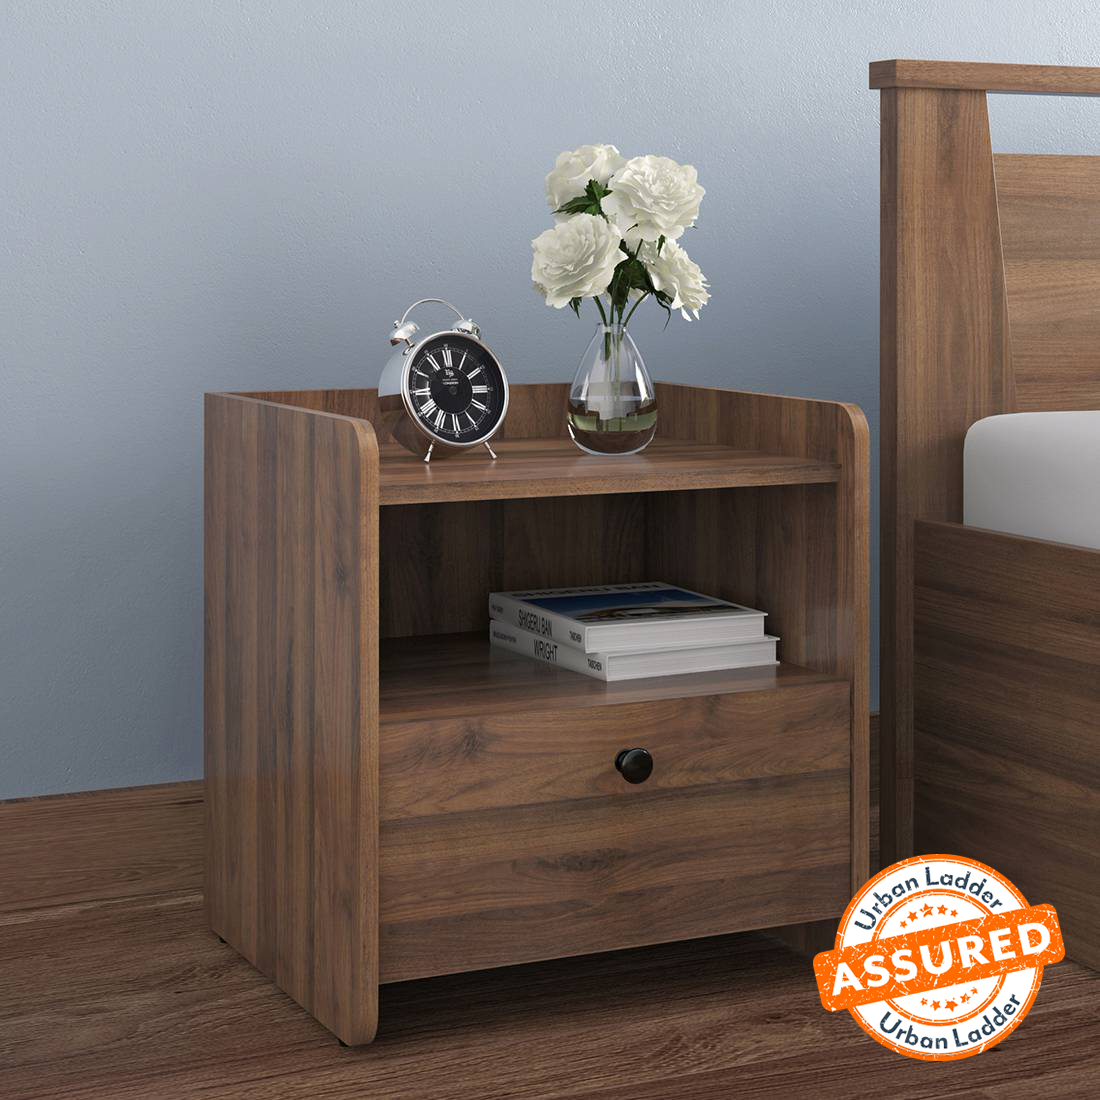 Up to 70% off on Bedside Tables | Full House Sale - Urban Ladder